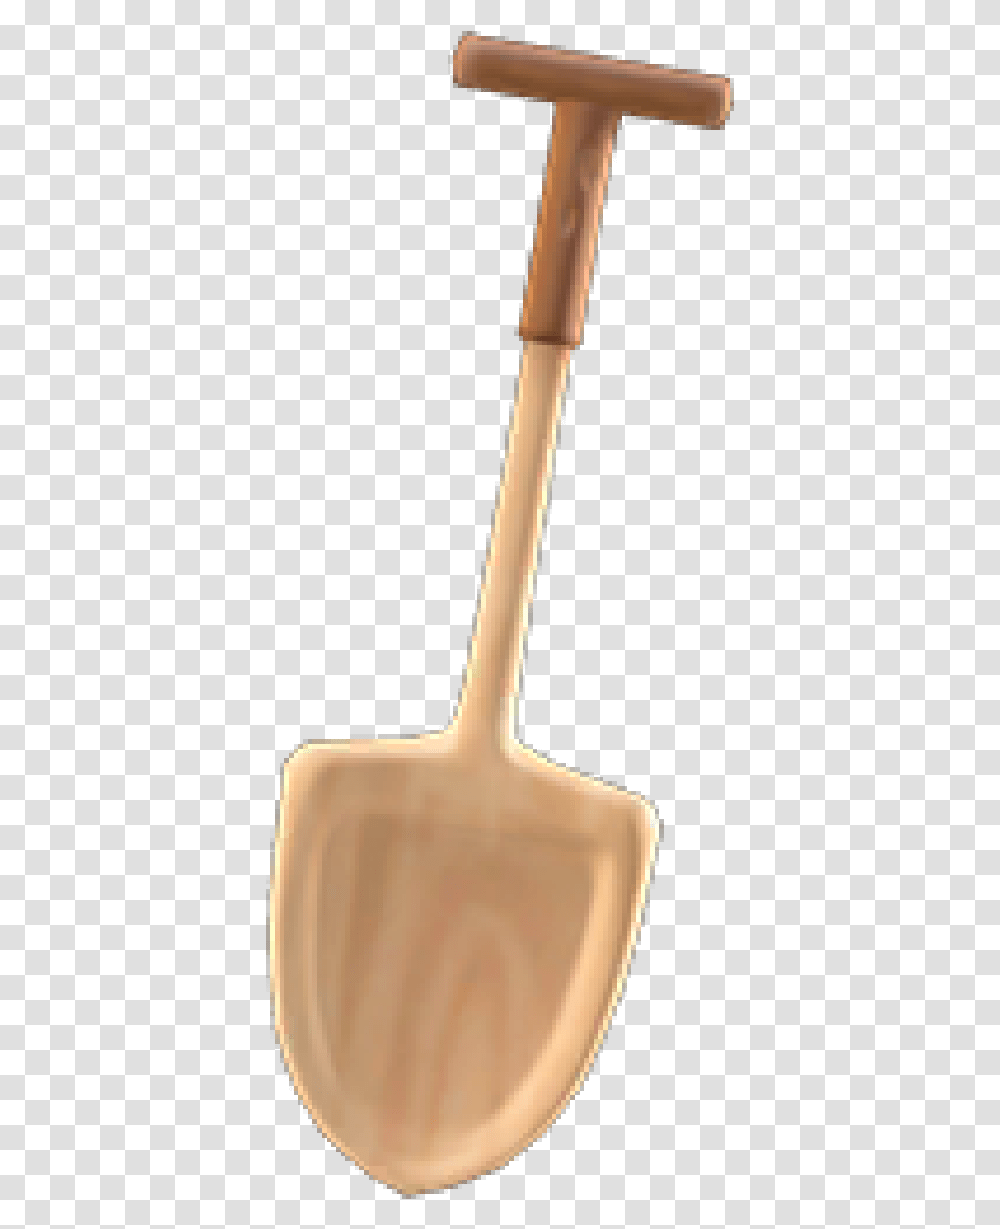 How To Craft Flimsy Shovel In Animal Crossing New Horizons Animal Crossing New Horizons Flimsy Tools, Broom, Outdoors Transparent Png